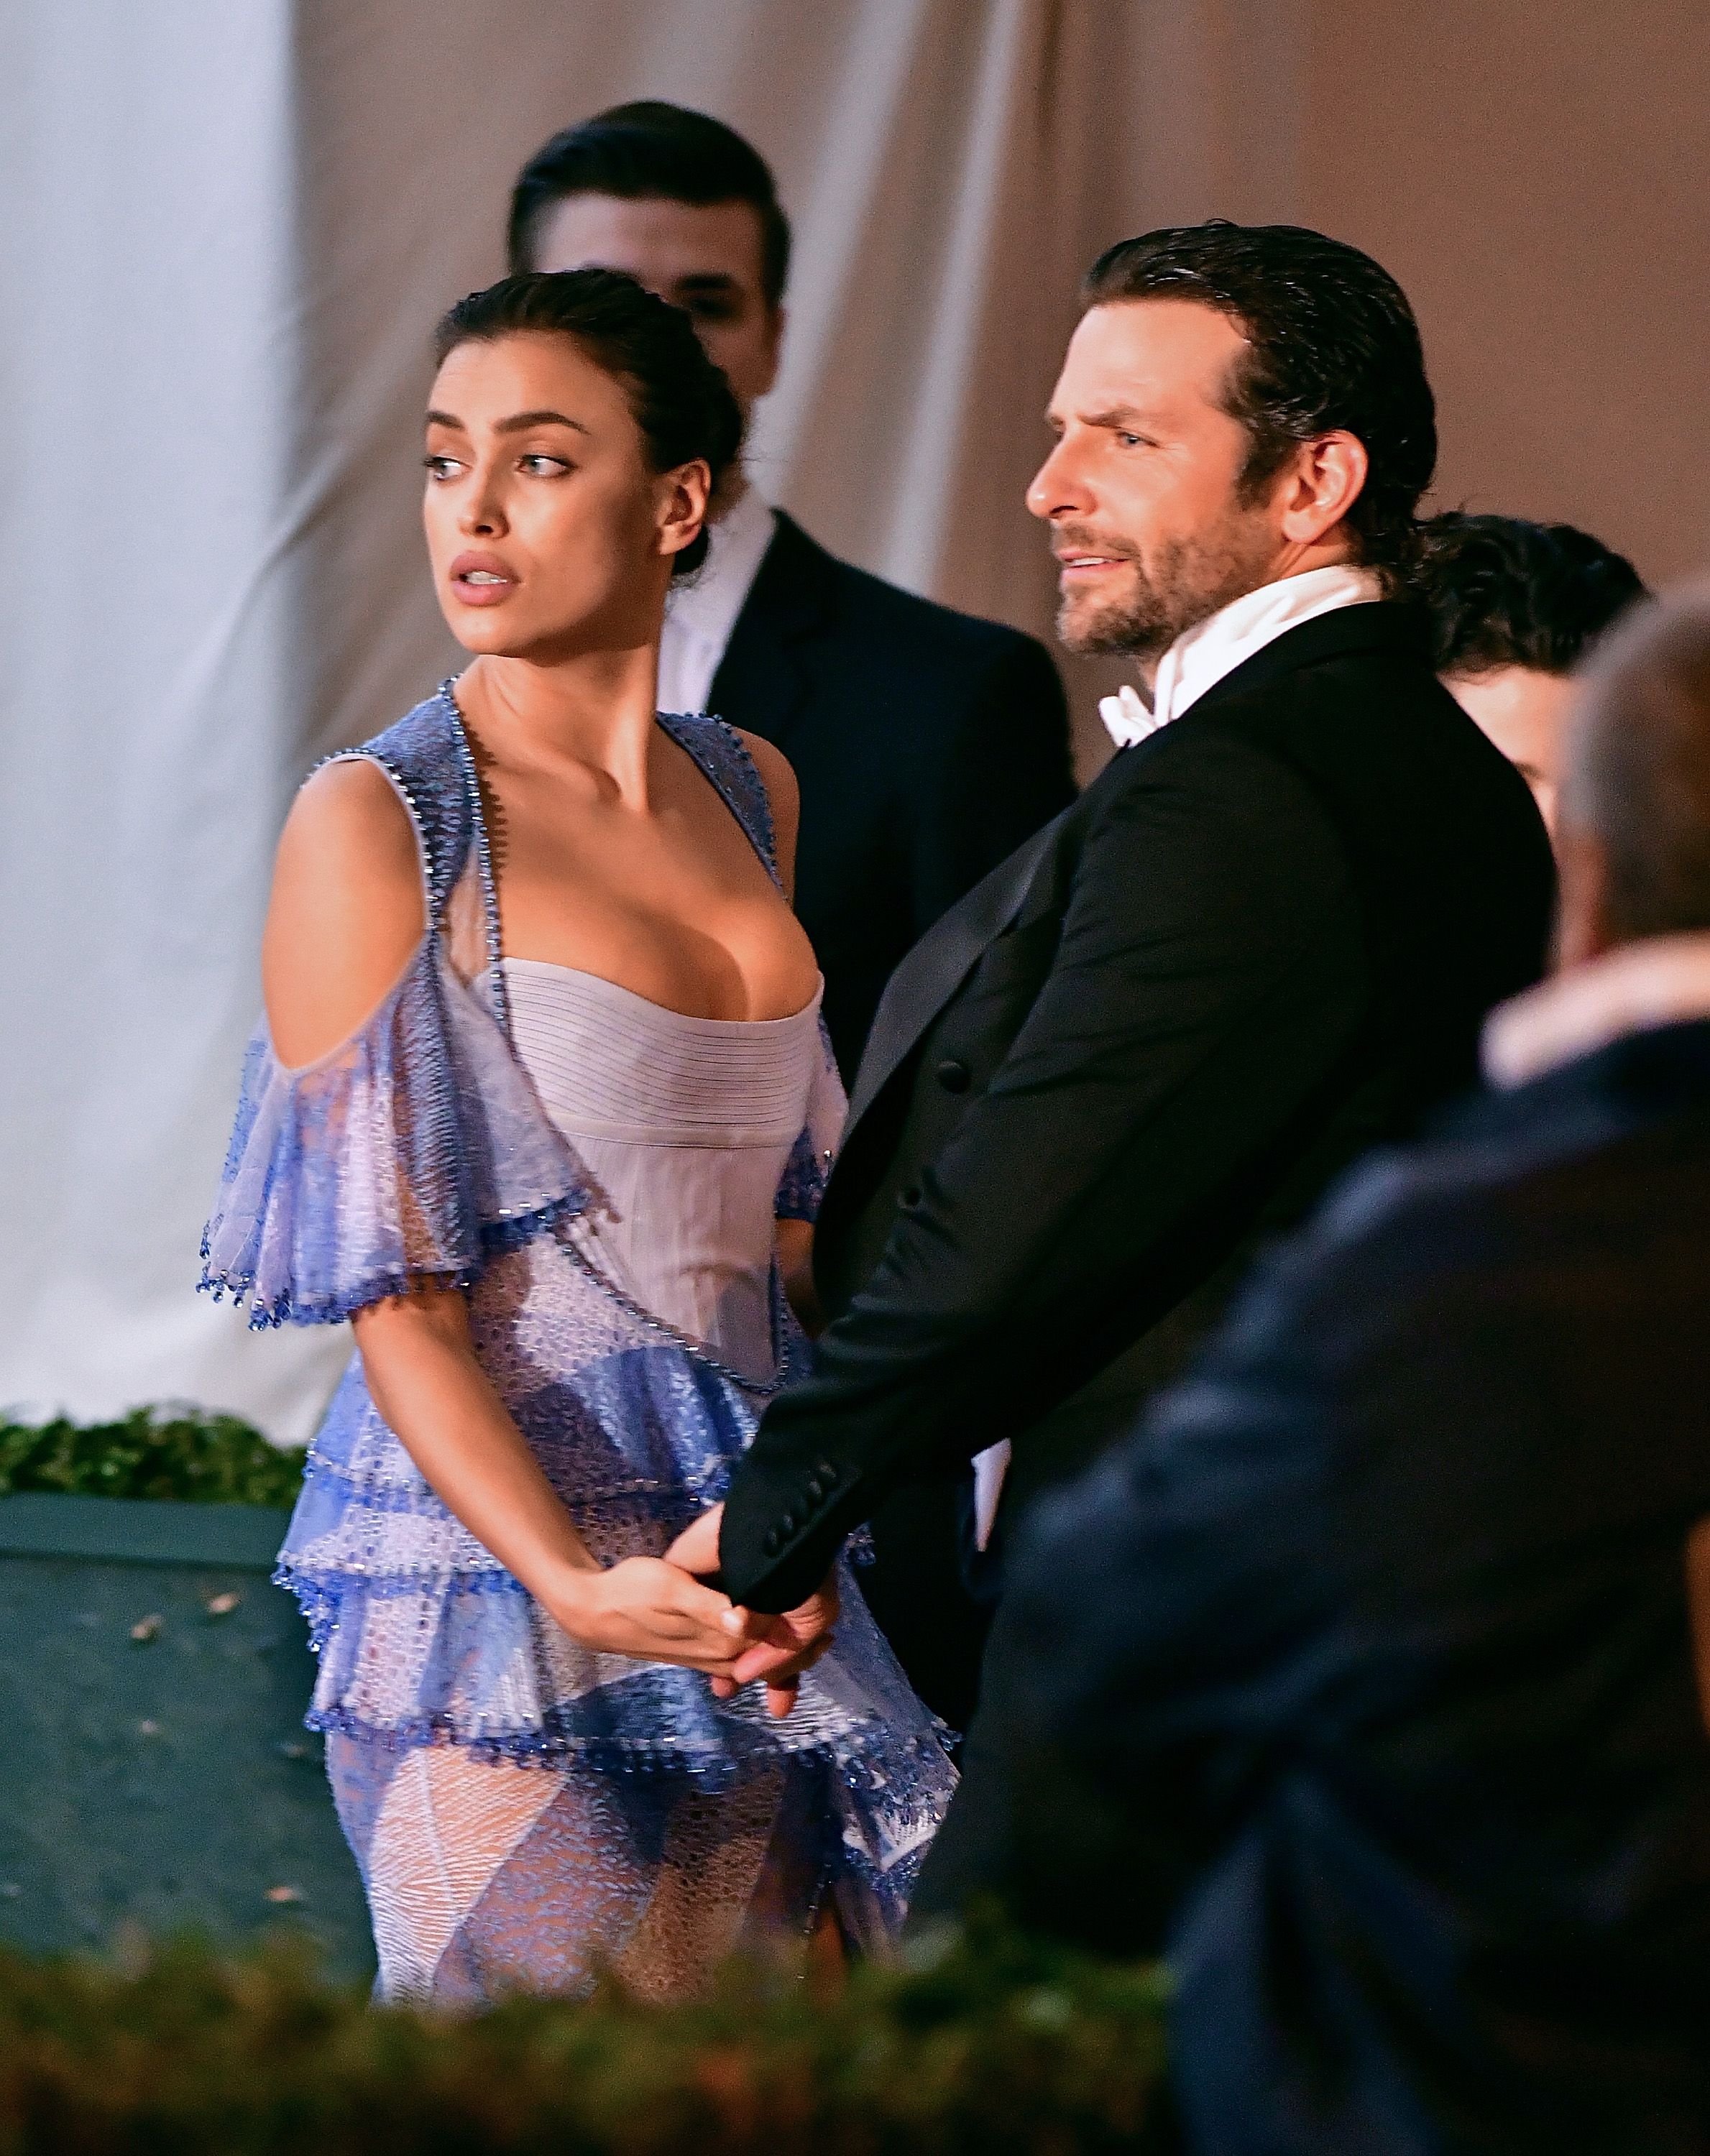 Bradley Cooper and Girlfriend Irina Shayk Are Close to Breaking Up - Why  Bradley and Irina Questioning Relationship